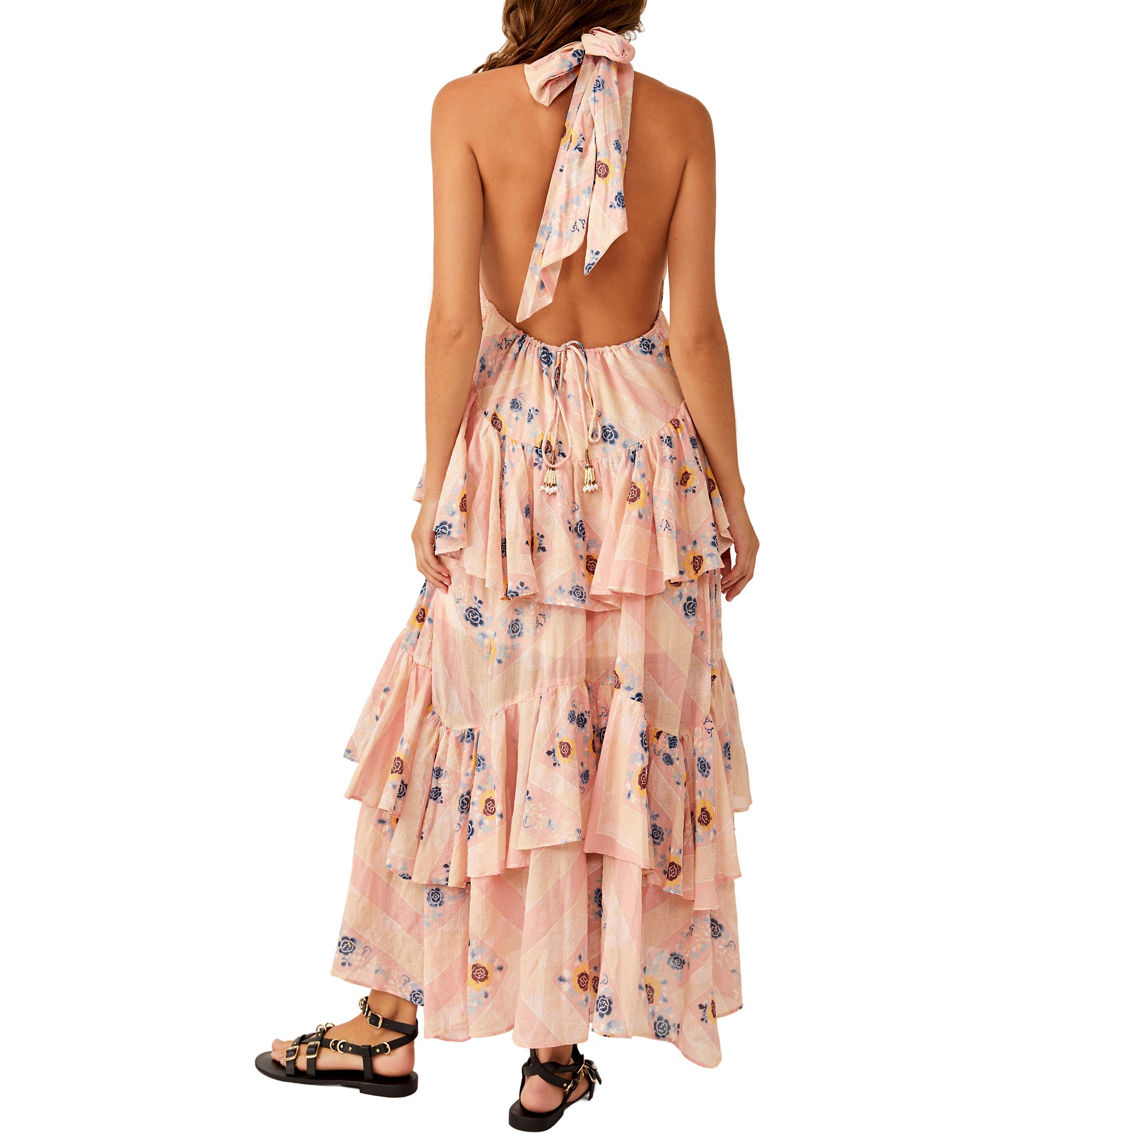 Free People Stop Time Maxi Dress - Image 2 of 4